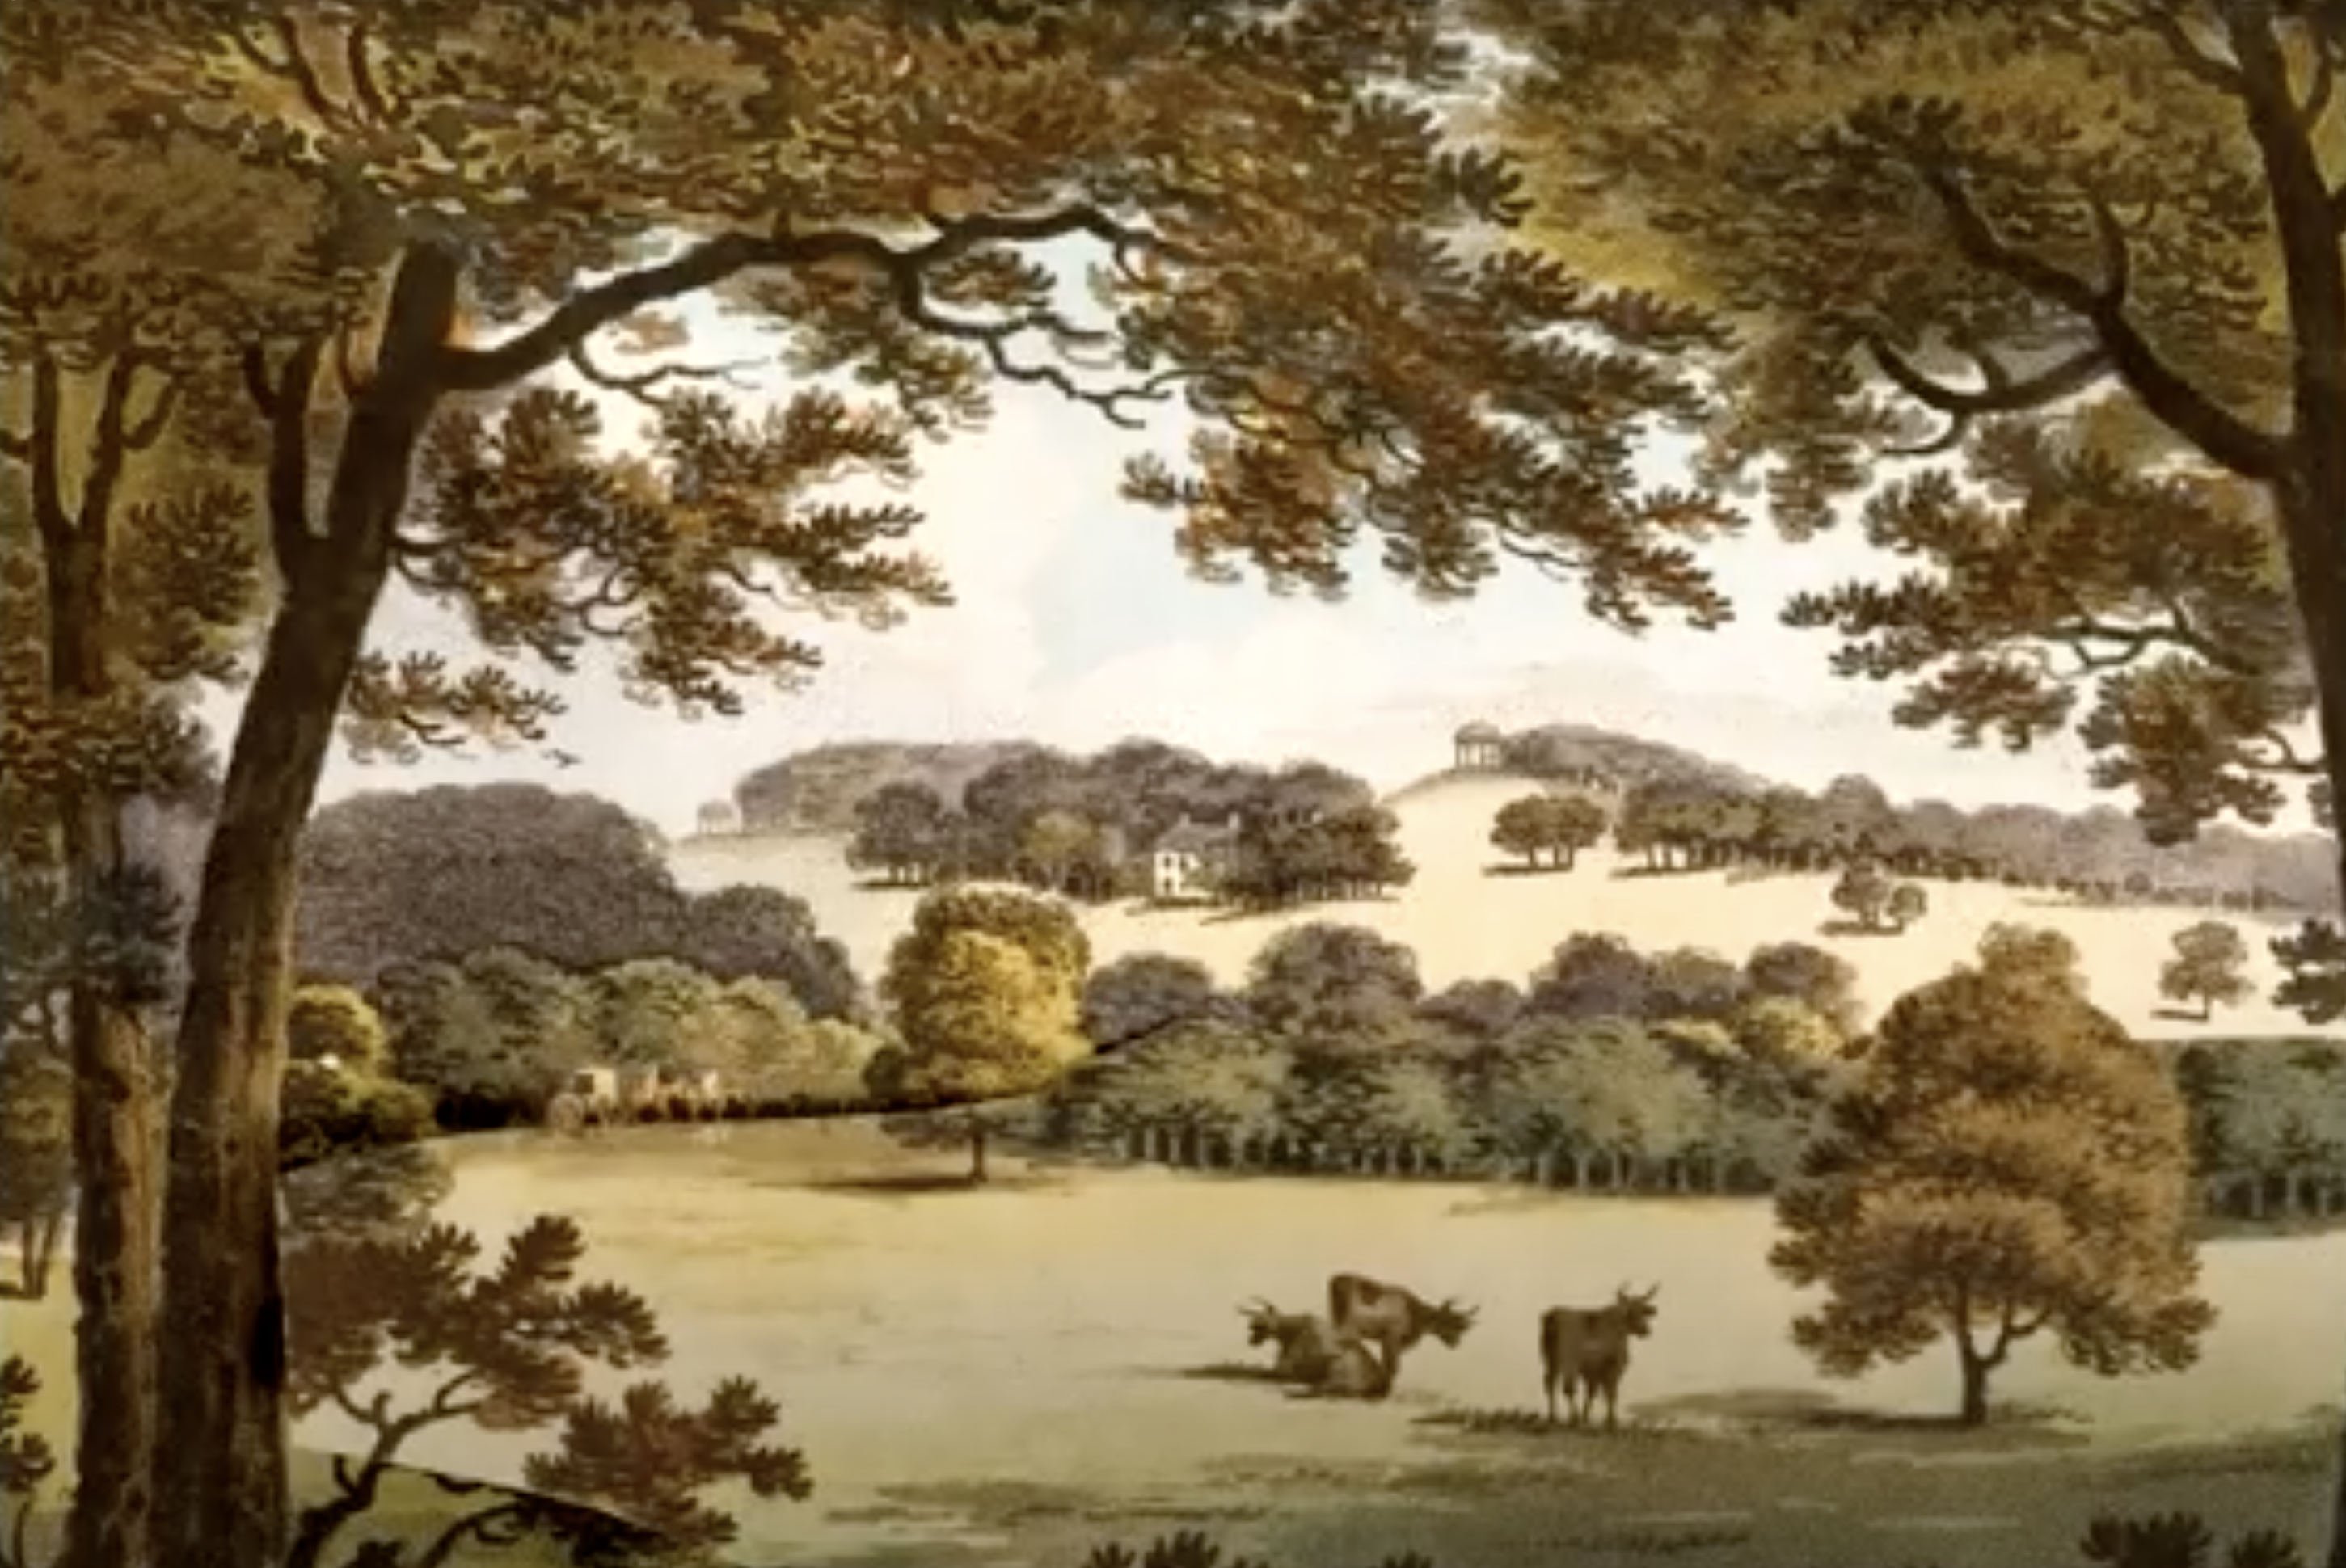 A picturesque scene by Humphry Repton